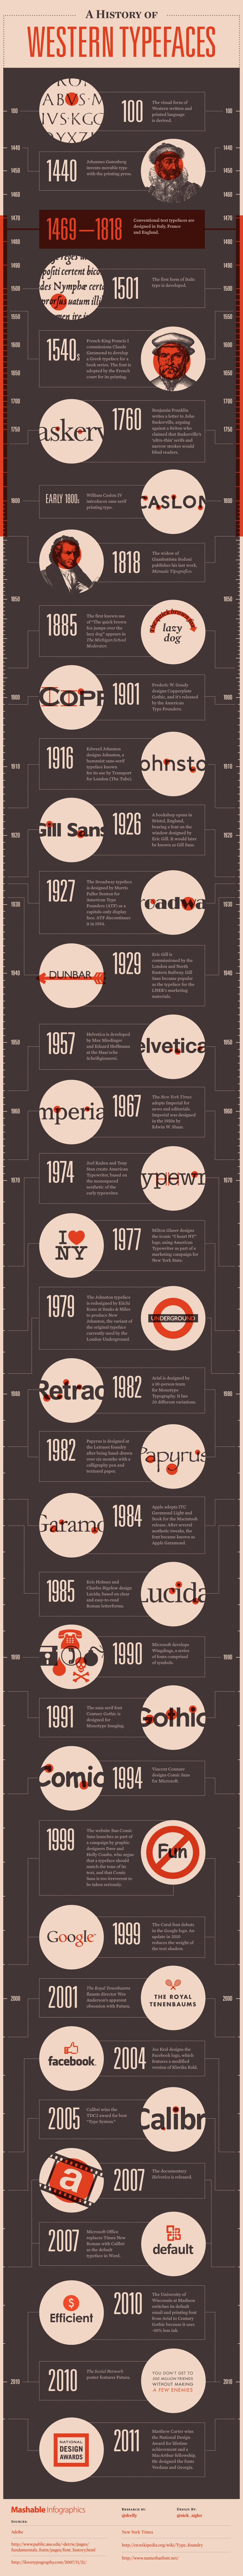 a-history-of-western-typefaces